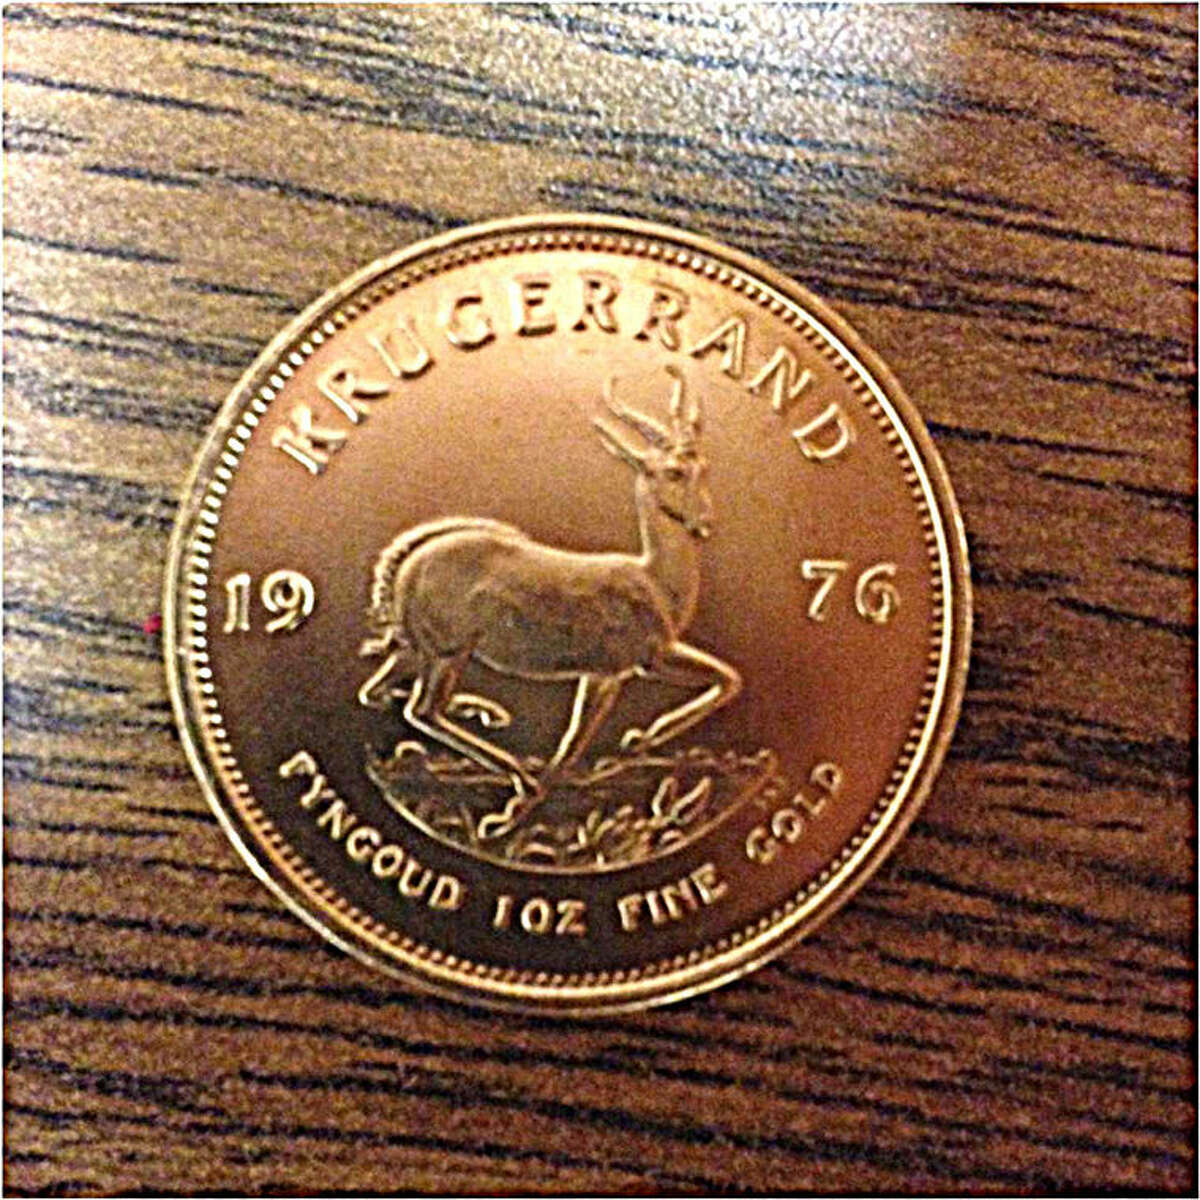 The South African Krugerrand coin, made from one ounce of gold, is estimated at $1,100.